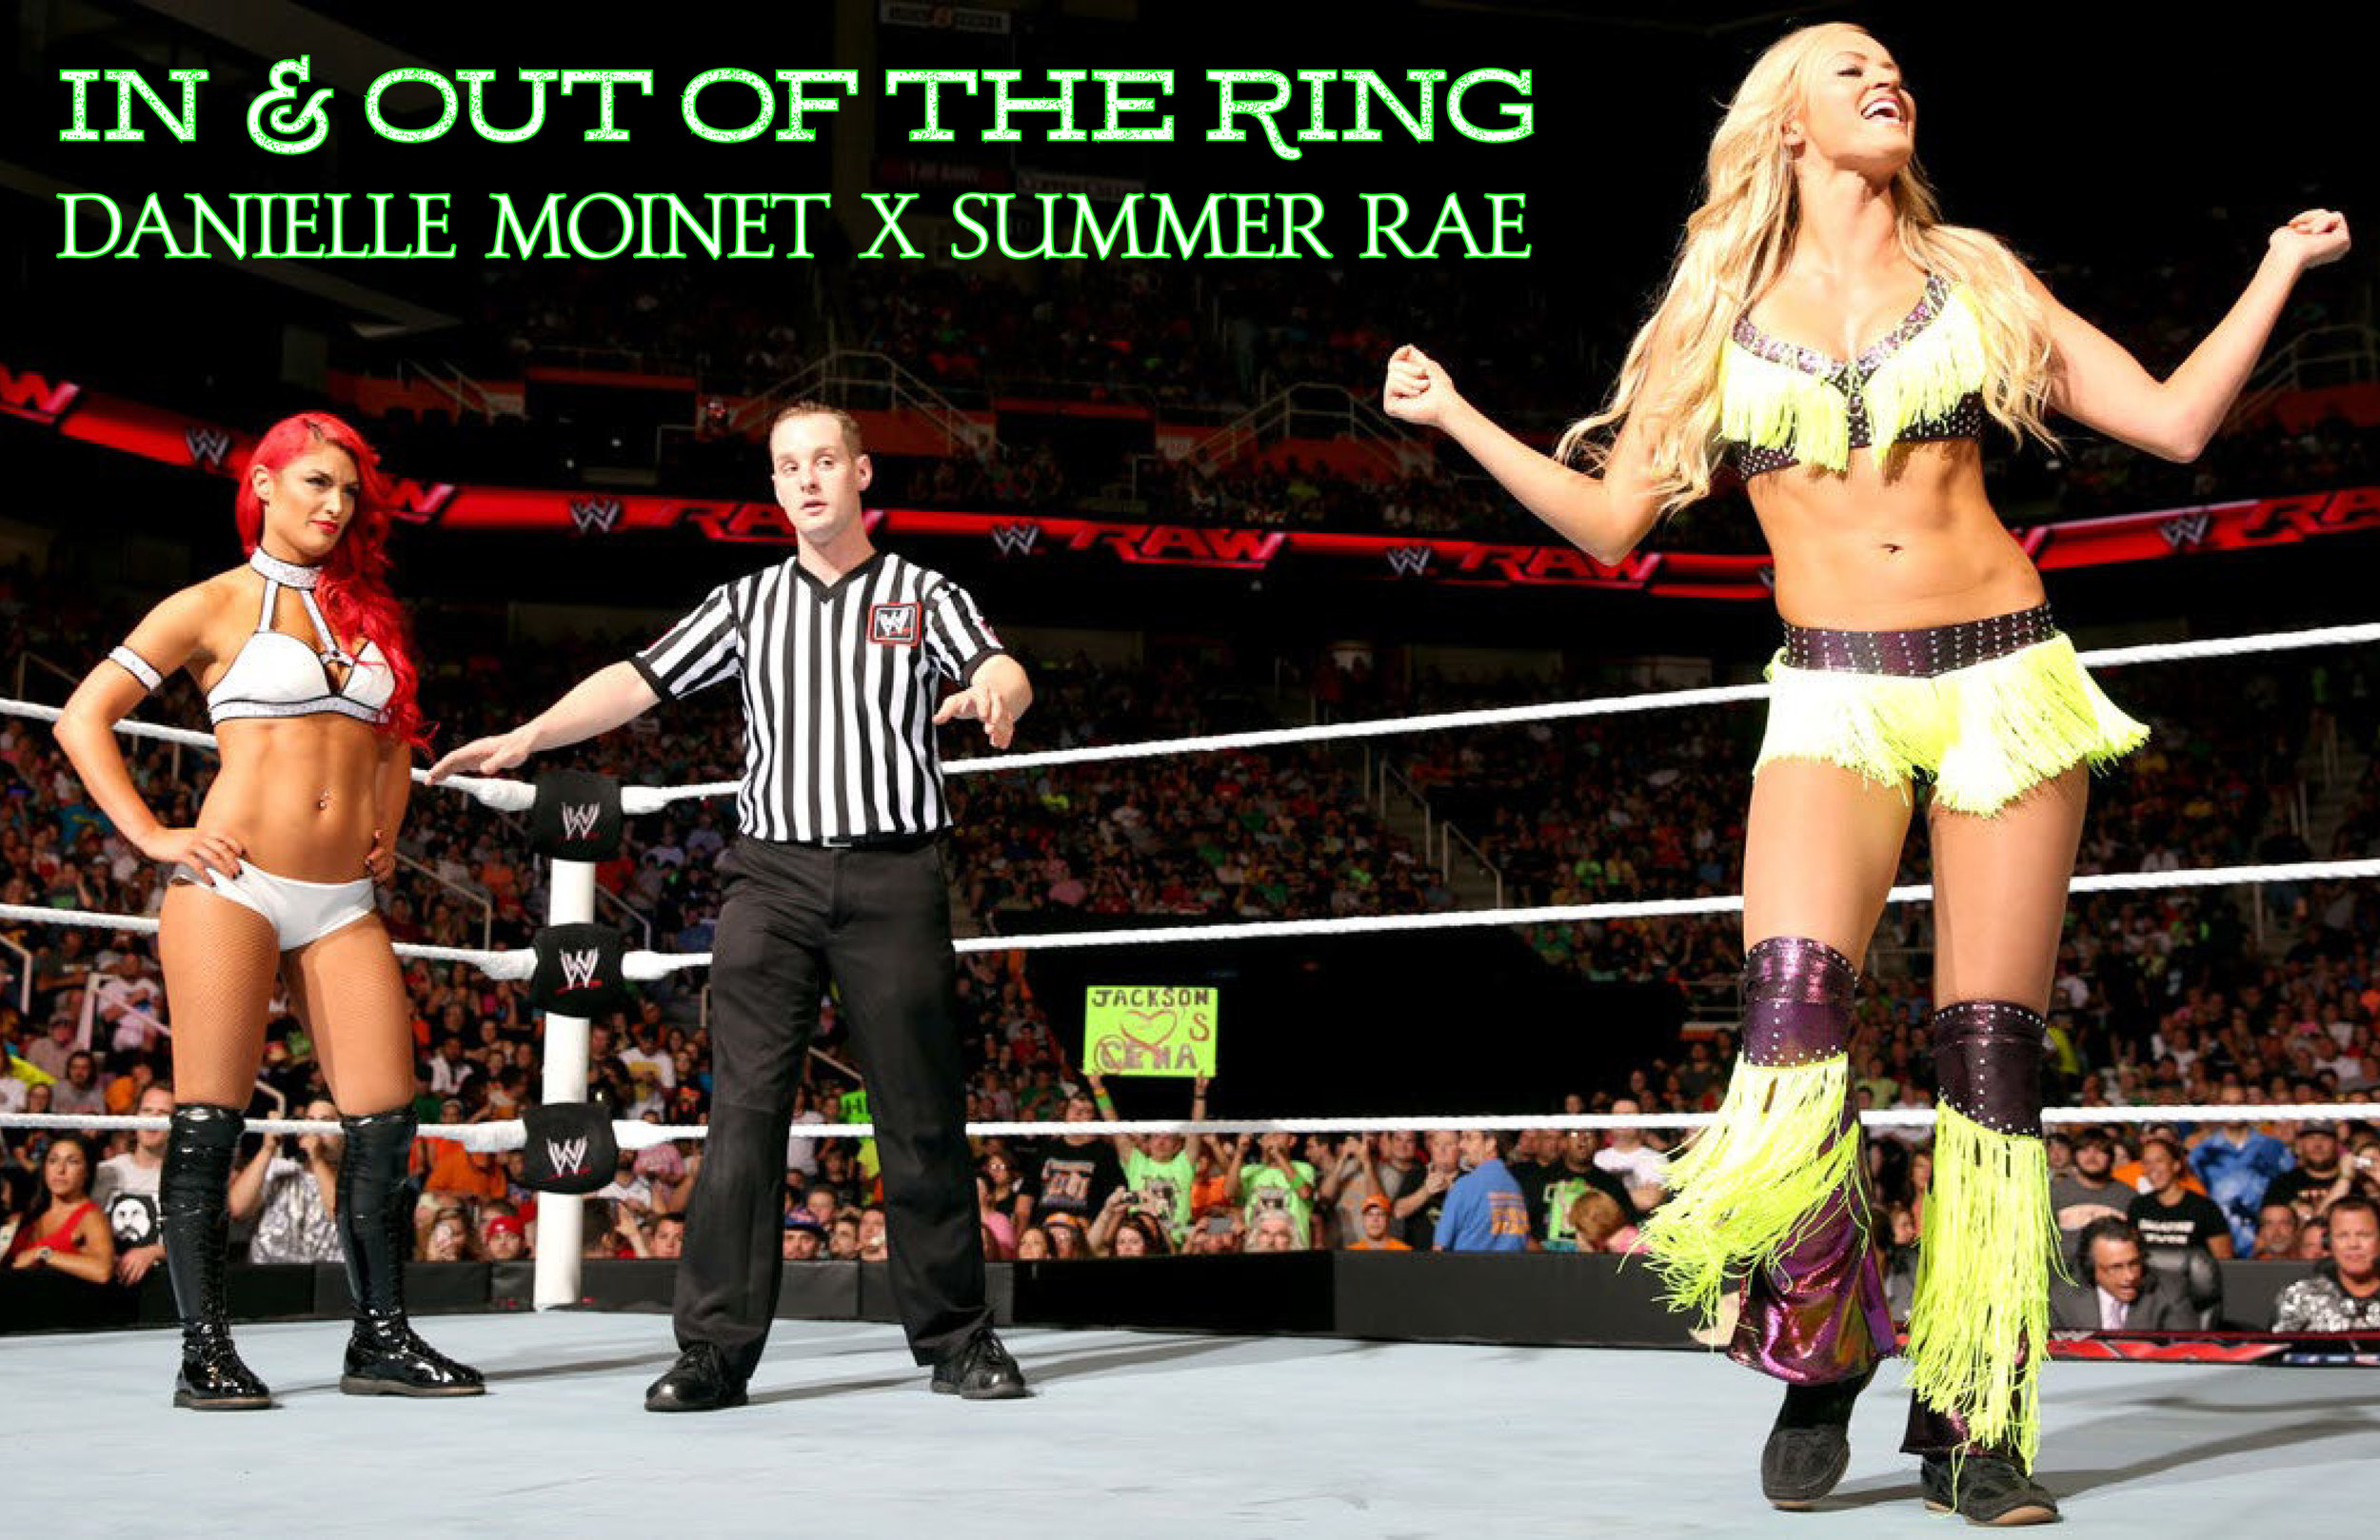 In and out of the ring danielle moinet X summer rae.